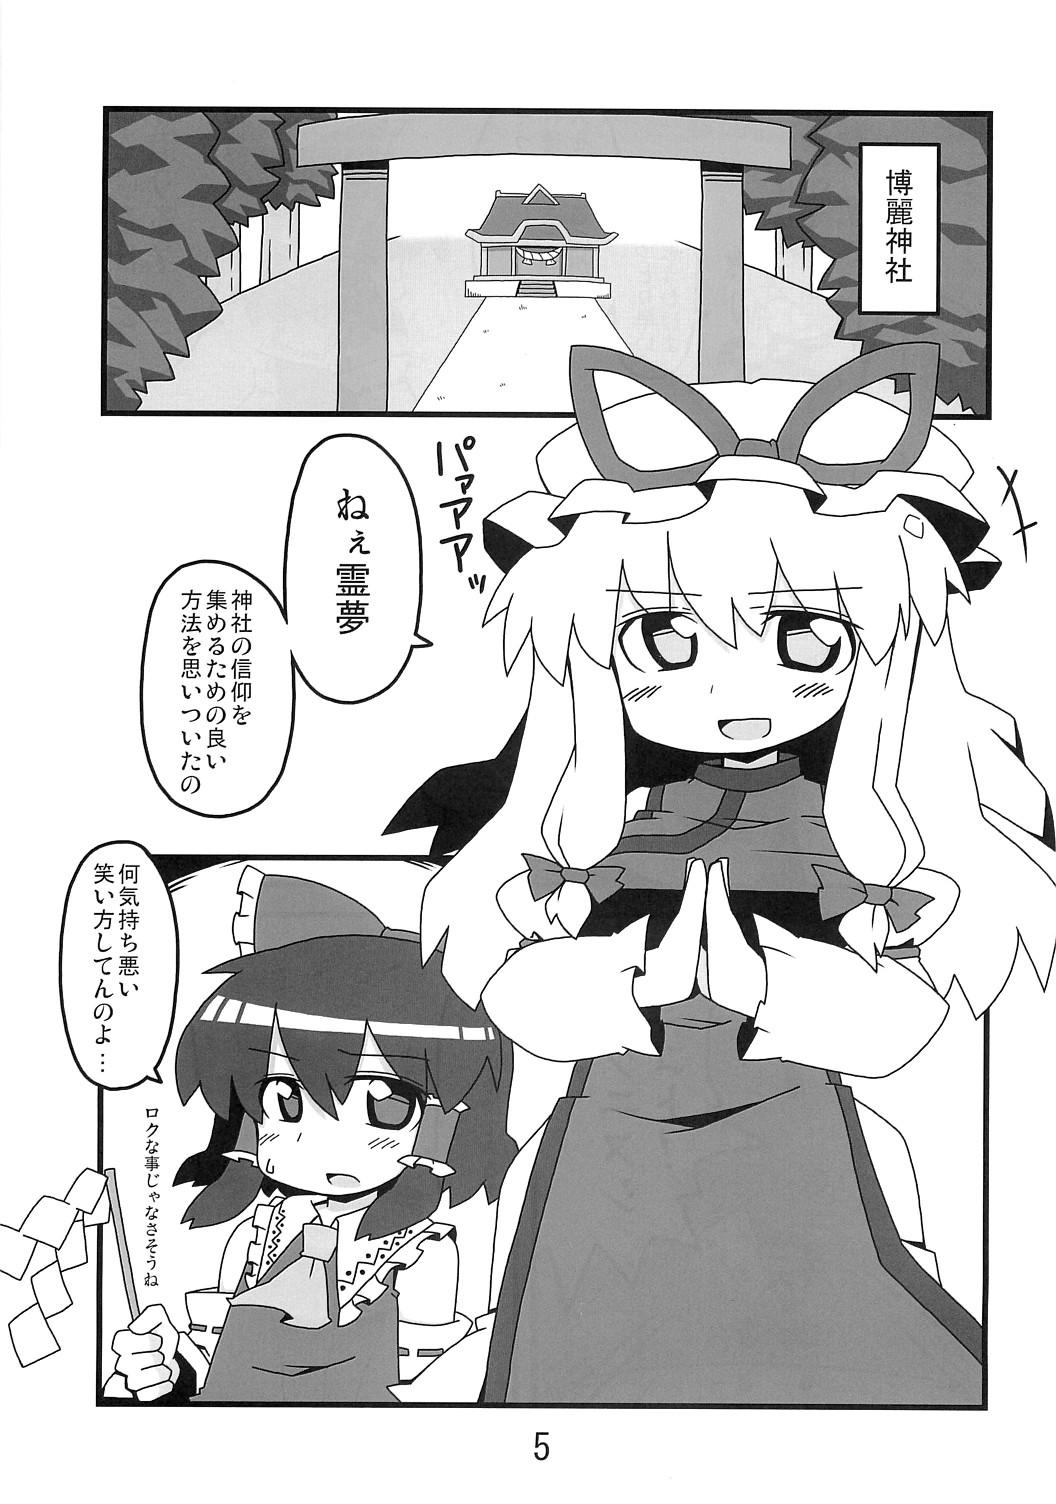 Bhabi 東方豊年祭 - Touhou project Cumfacial - Page 4